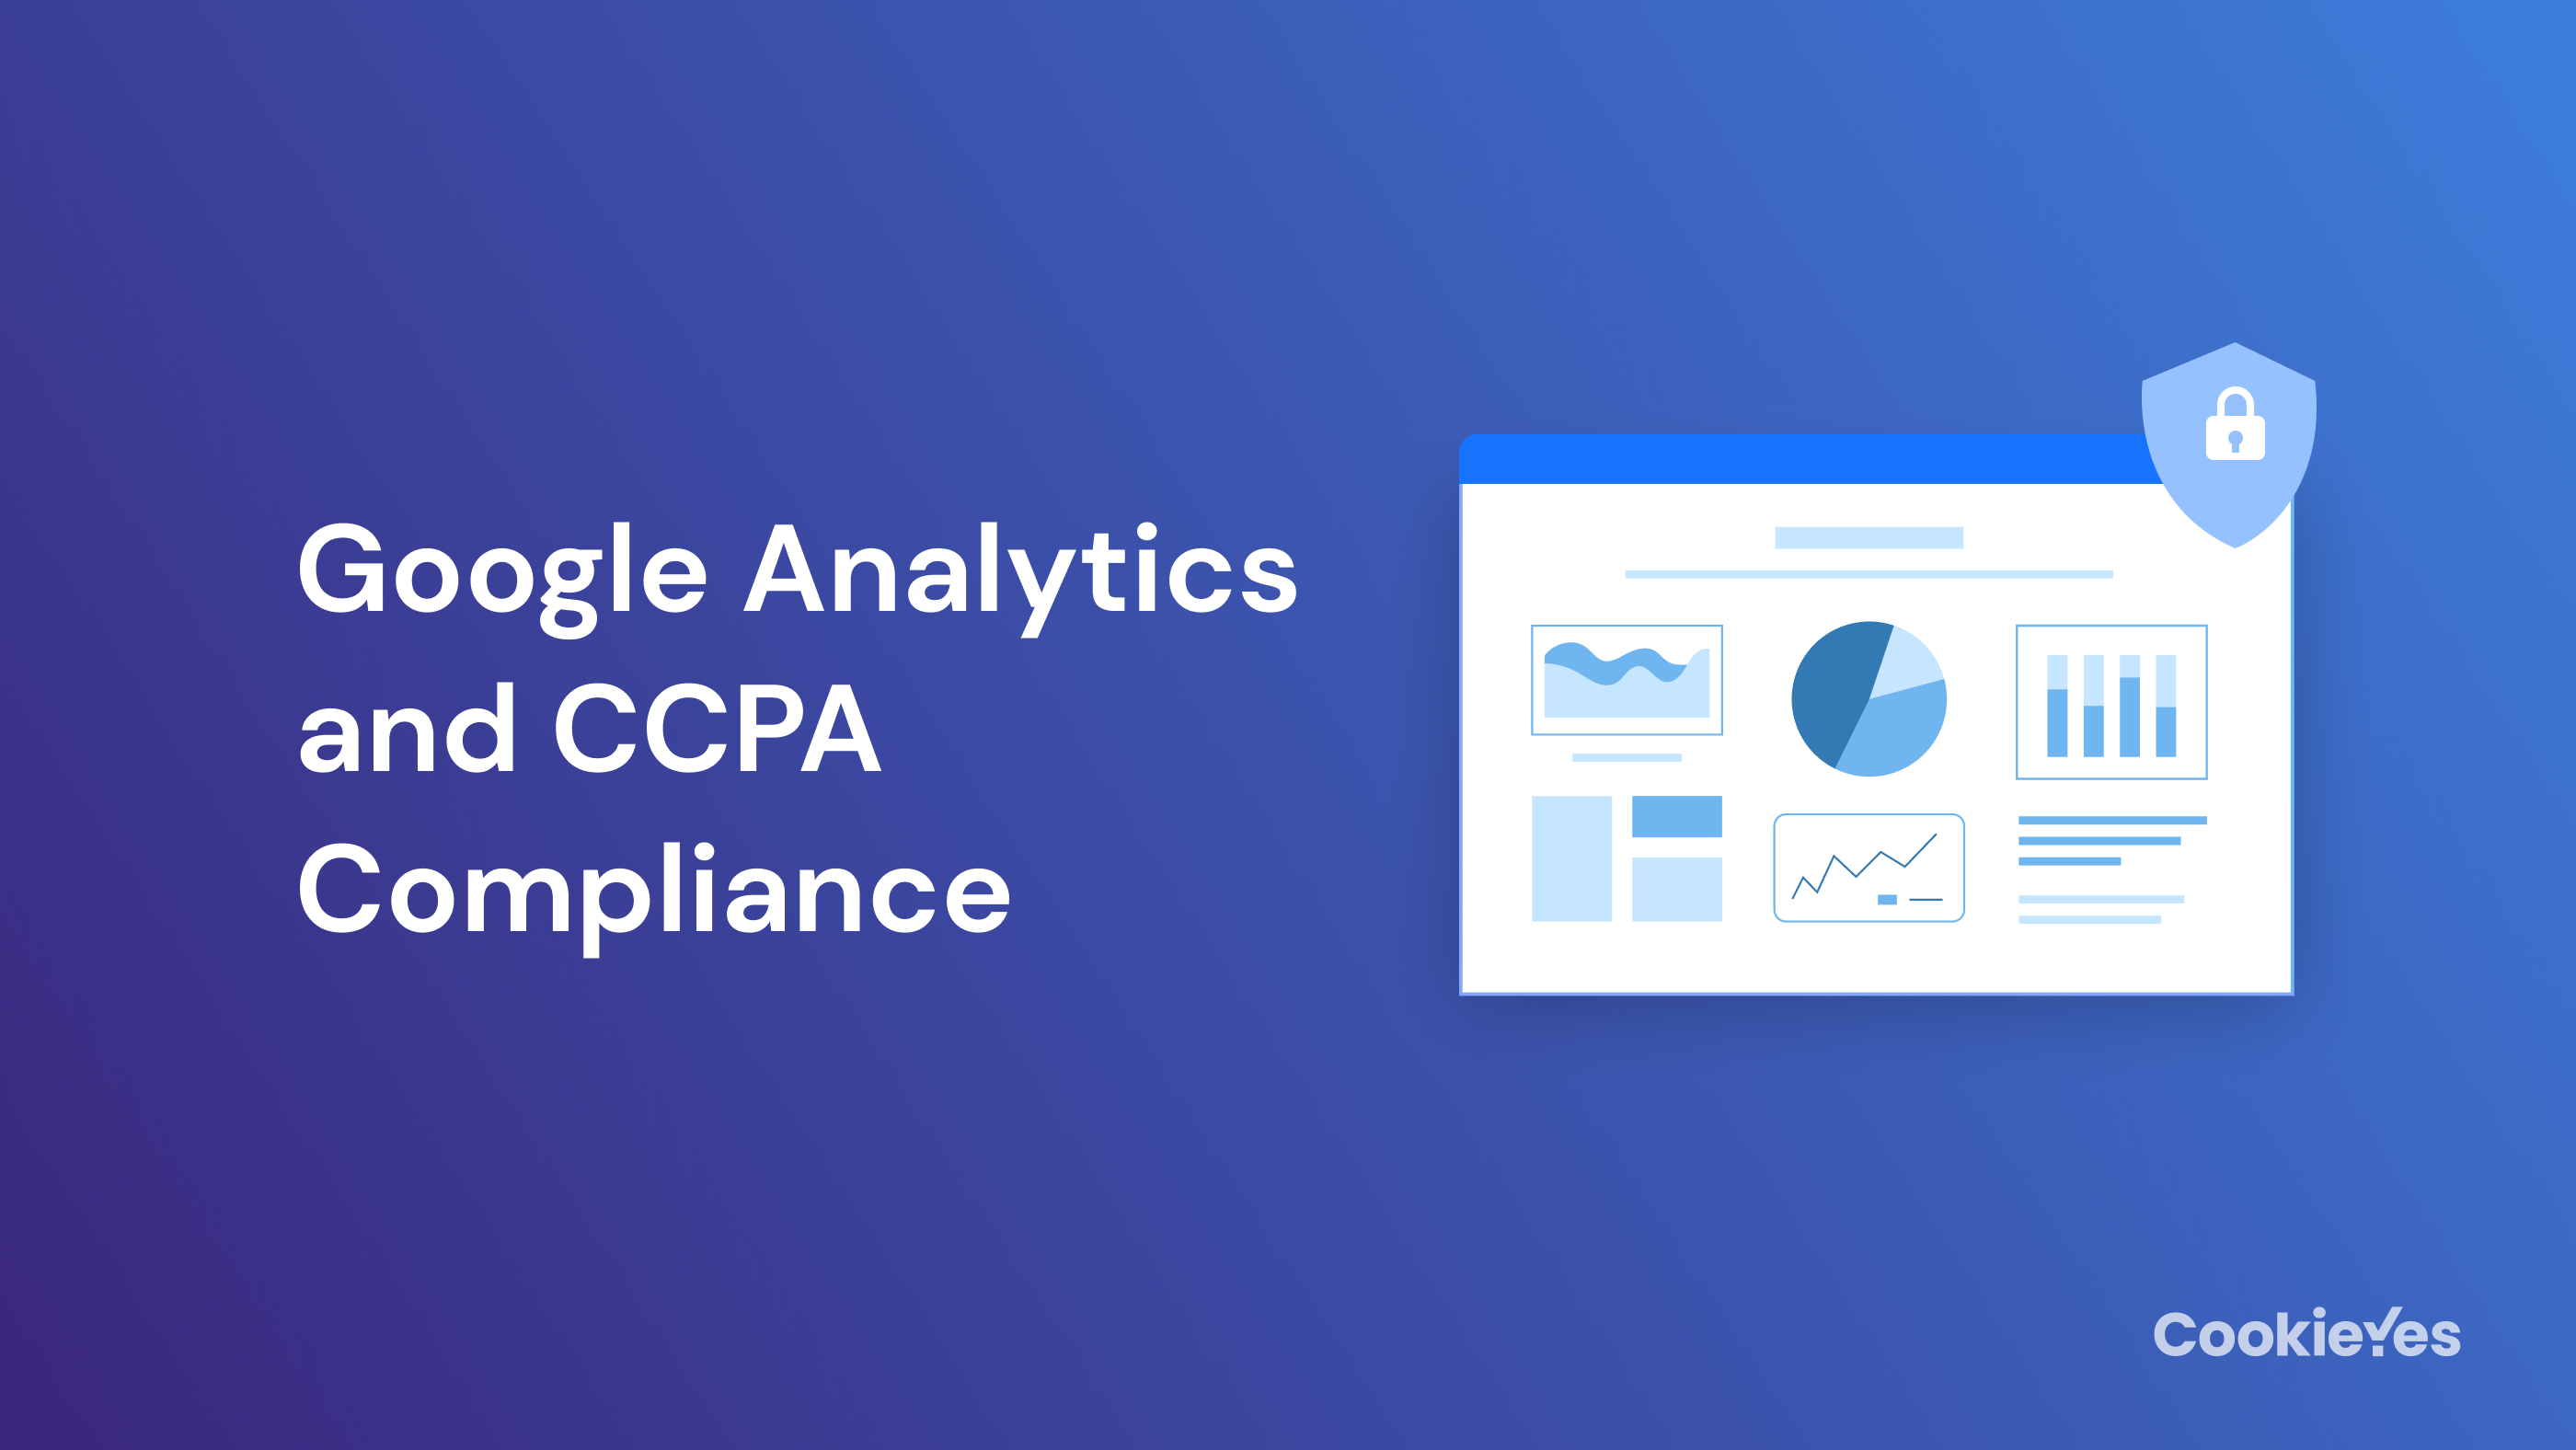 How to make Google Analytics CCPA Compliant